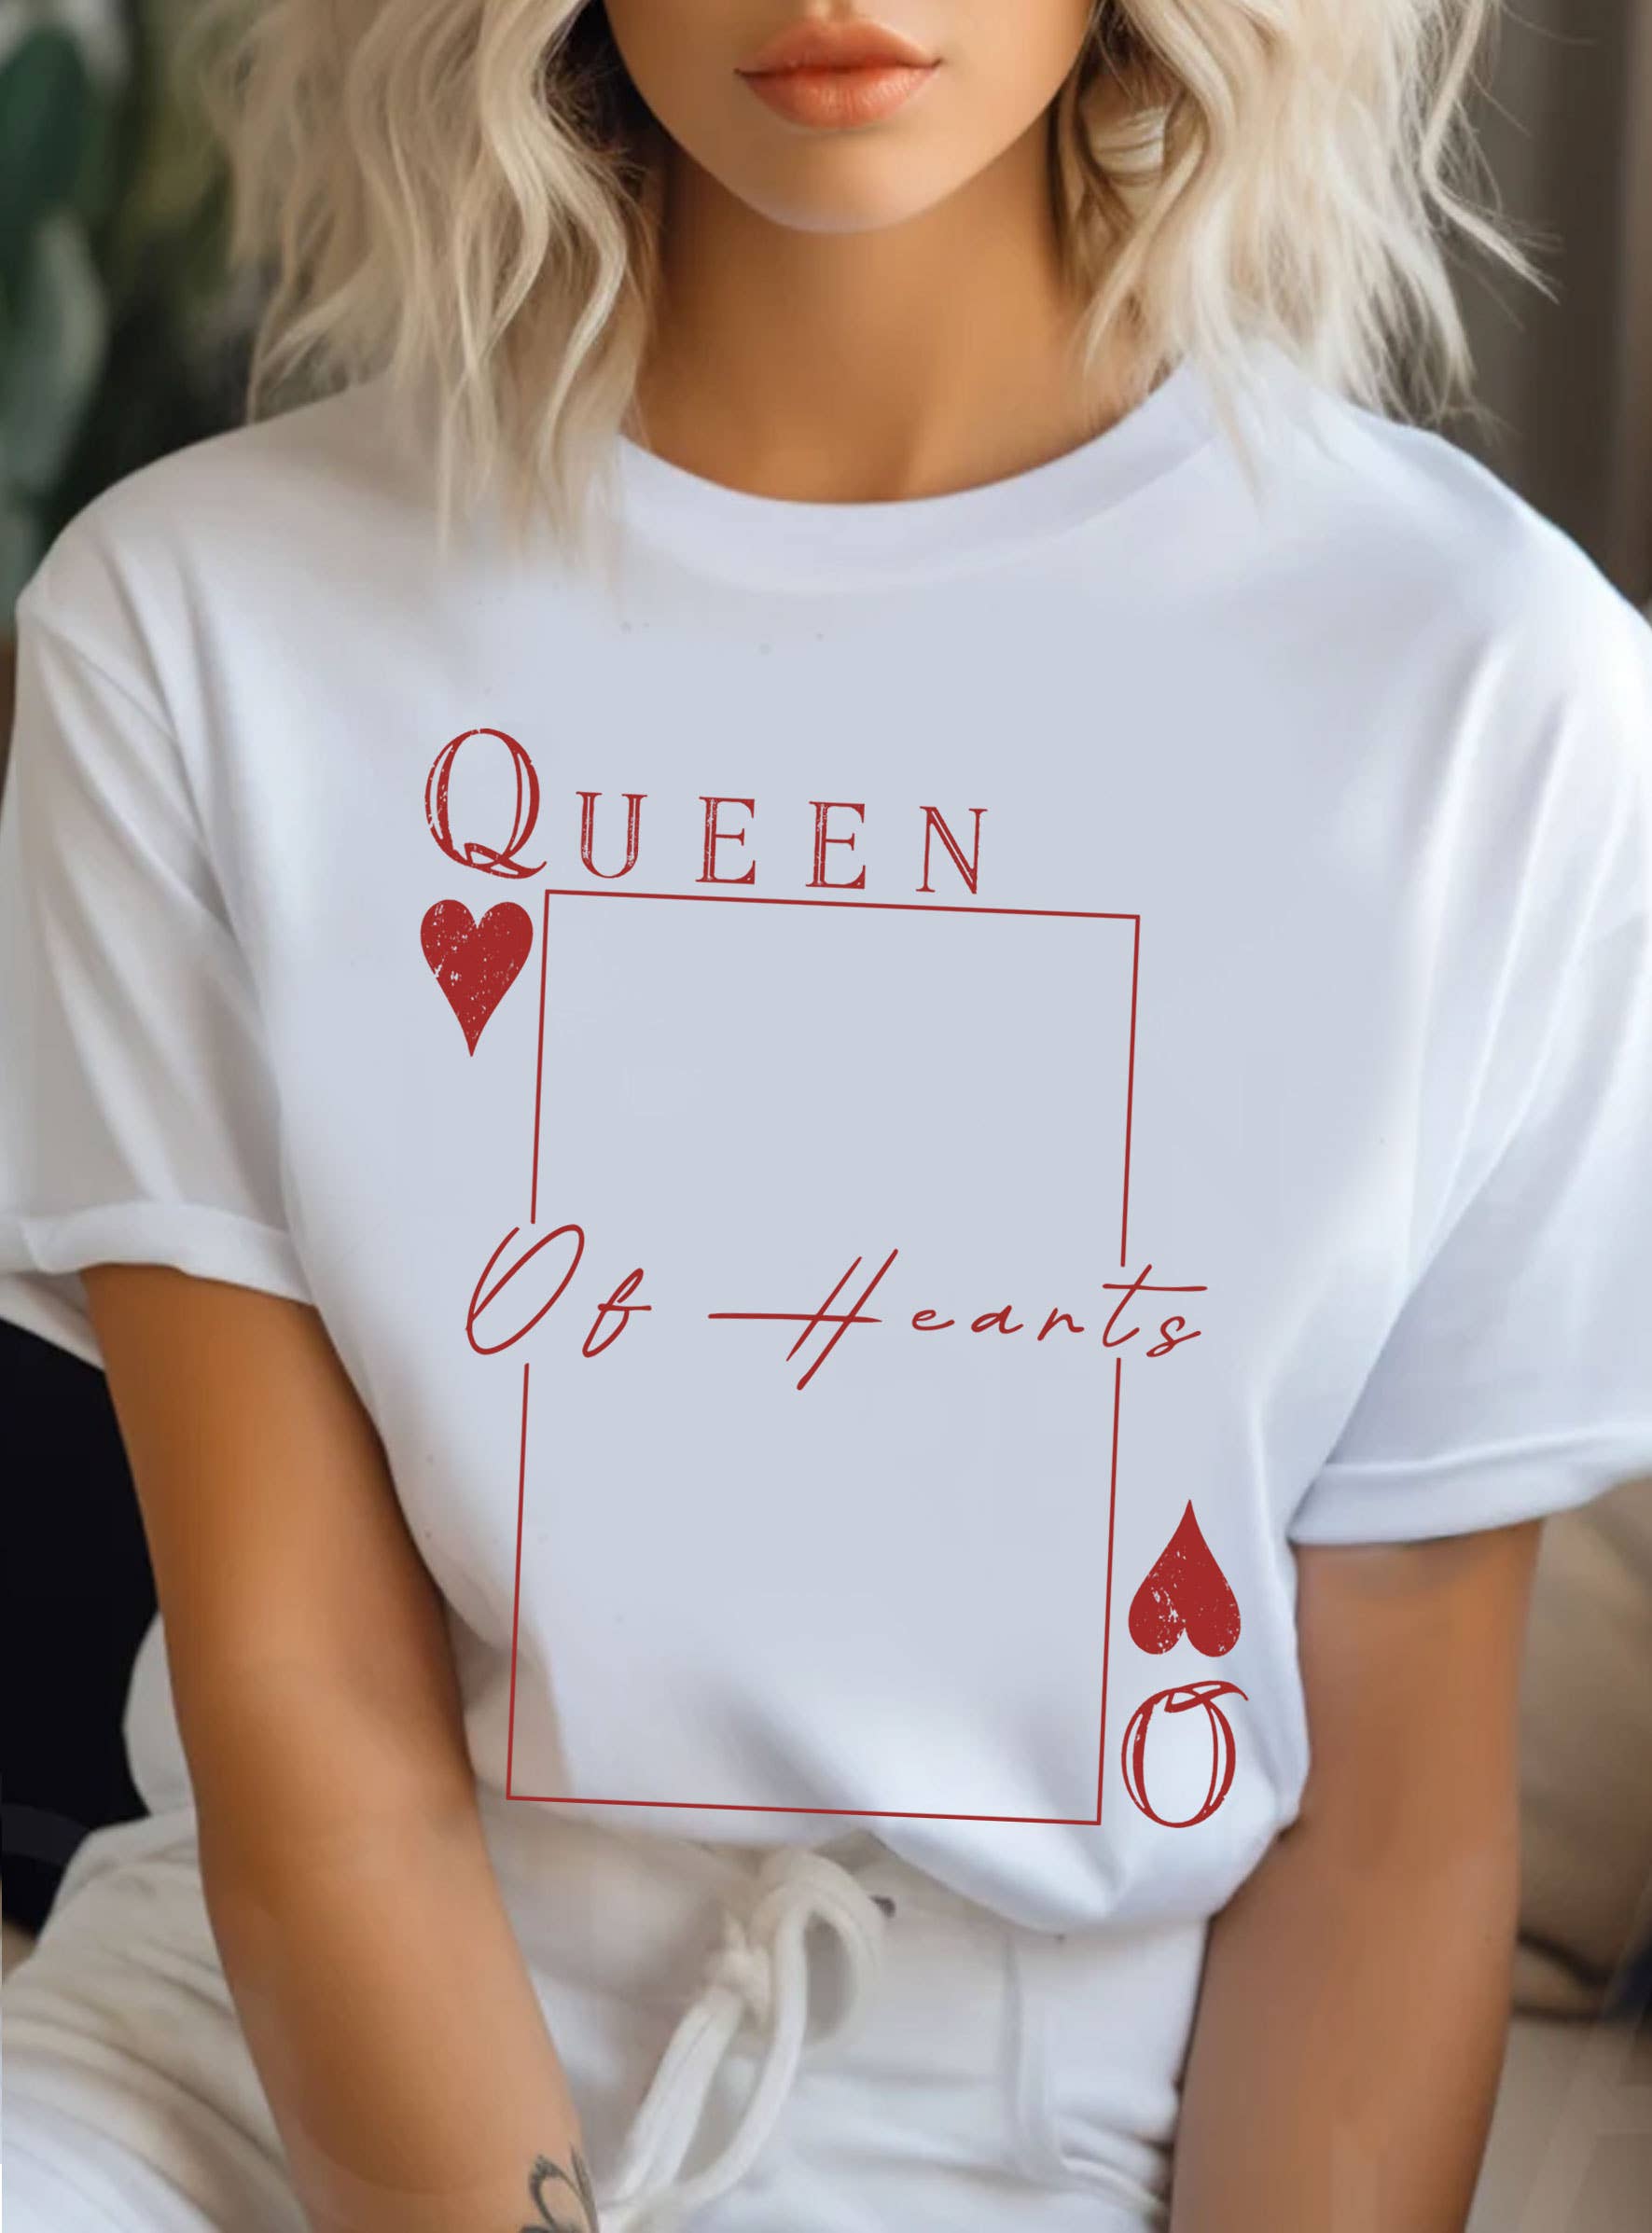 QUEEN OF HEARTS GRAPHIC TSHIRT: White